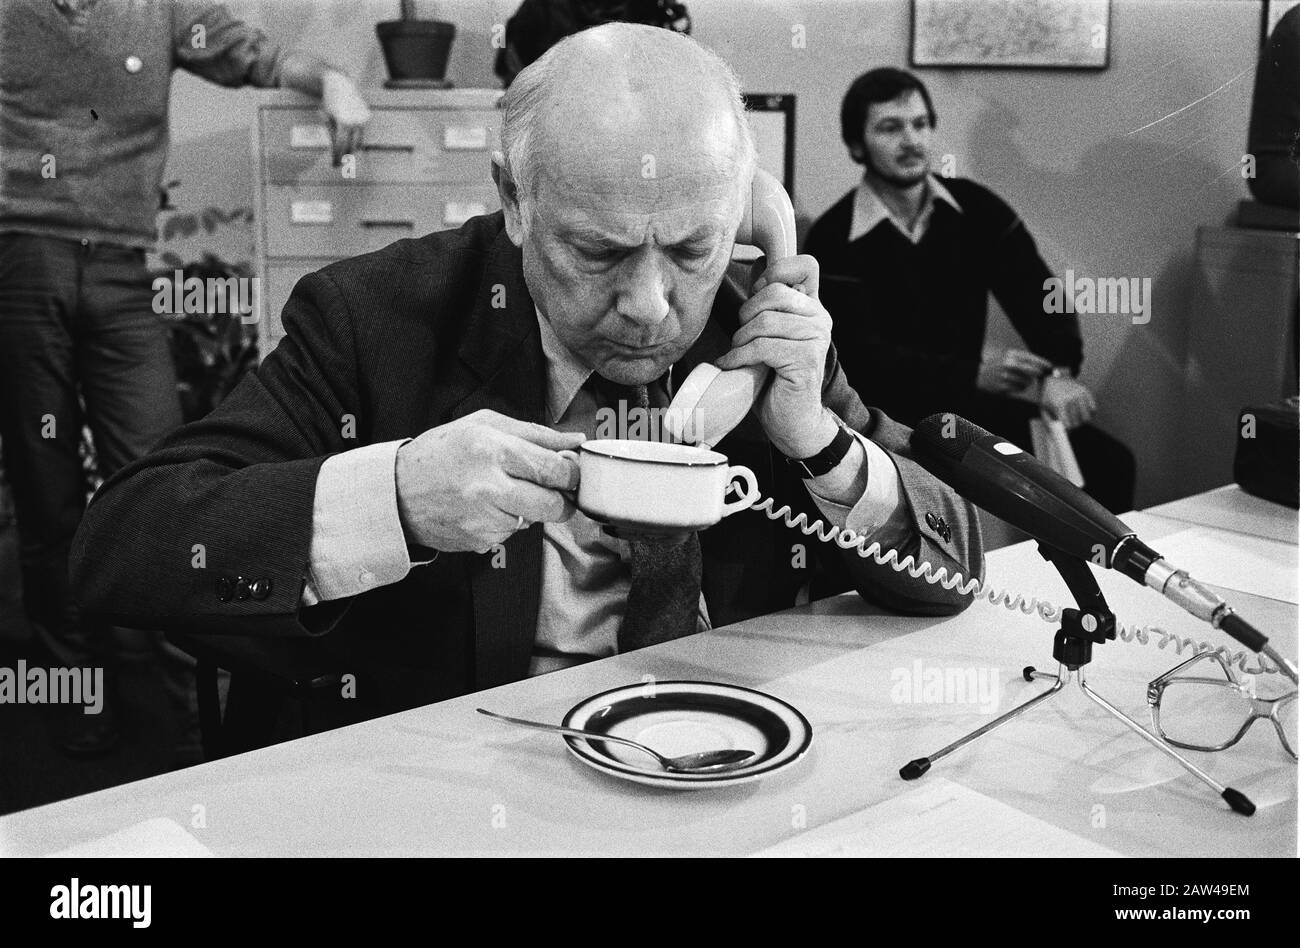 PvdA top members answered the phone at office party PvdA in Amsterdam. Den Uyl on the phone with a cup of soup Date: March 11, 1982 Location: Amsterdam, Noord-Holland Keywords: ministers, political parties Person Name: Uyl, Joop den Stock Photo